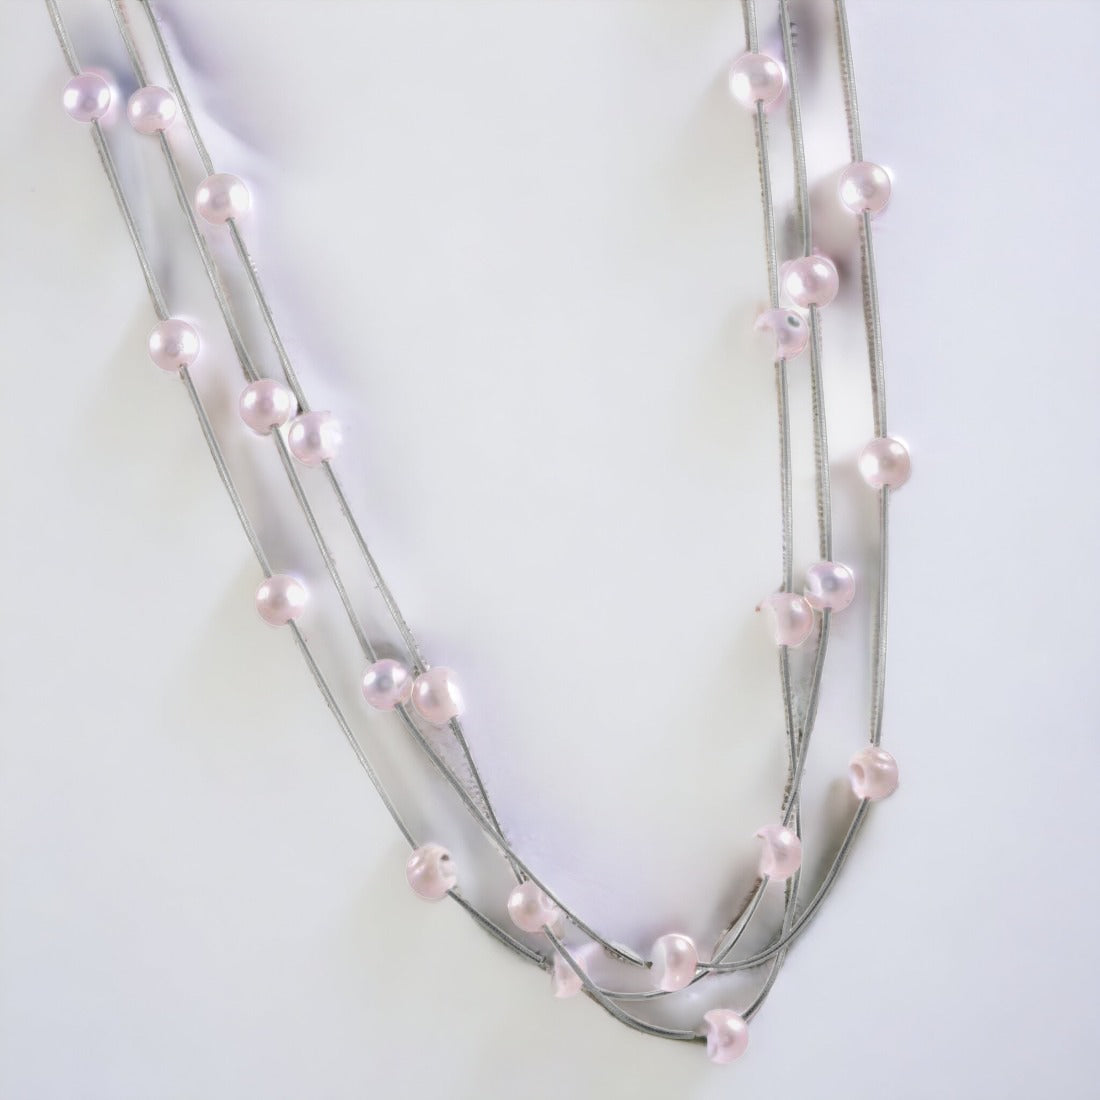 Silver Multi Silver Pearls Necklace For Women & Girls